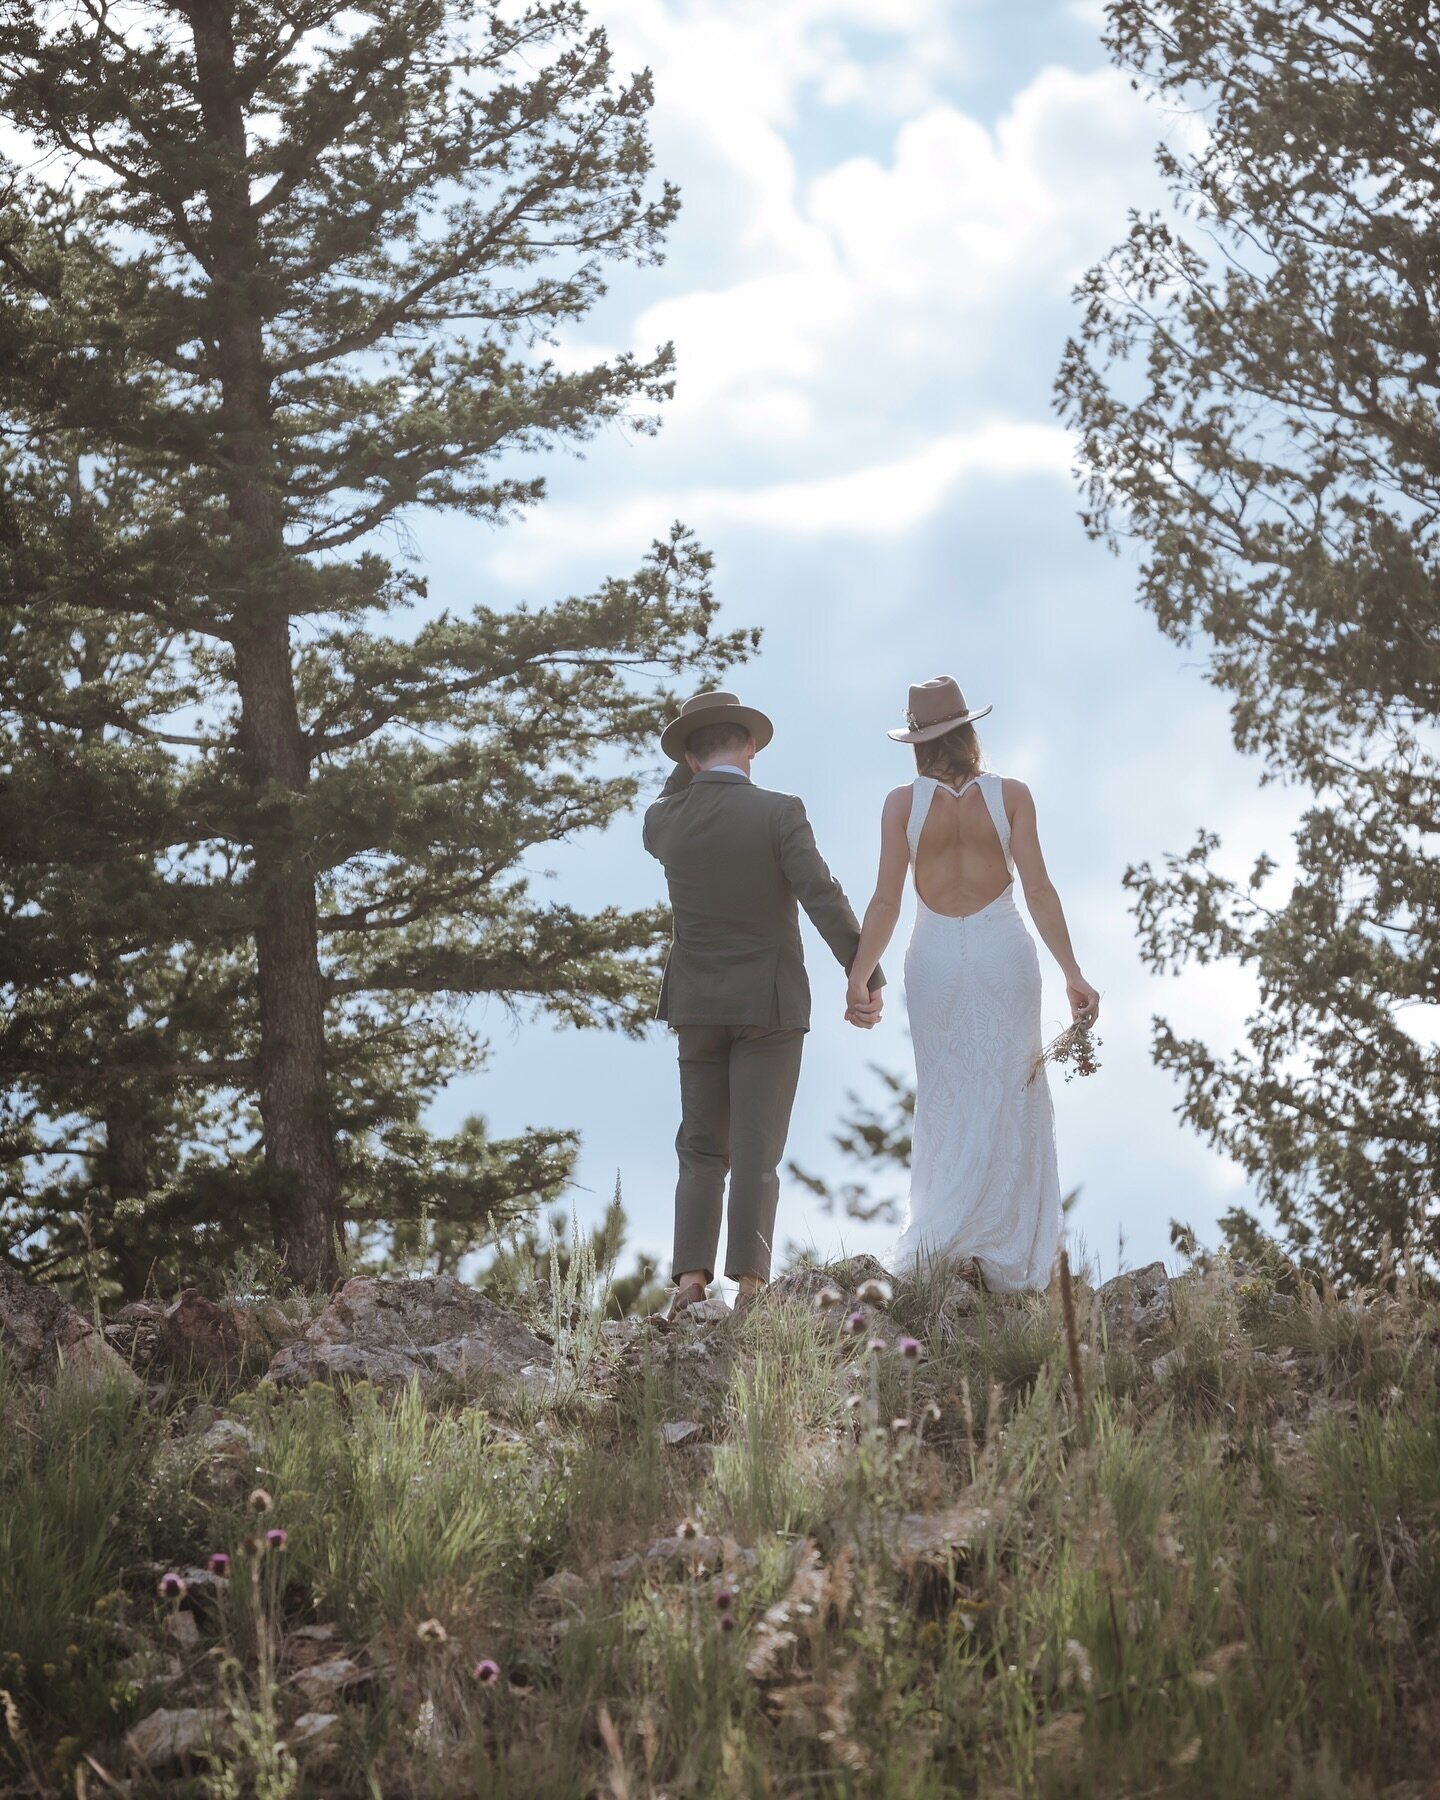 Always take a moment to take in the beauty around you on your wedding day! 
.
.
.
Photo @antlerrunphotography 
Venue- @coloradomountainranch 
Catering- @aspiceoflifecatering 
.
.
.
.

#weddingparty #weddinggoals #weddingvibes #weddingday #weddingphot